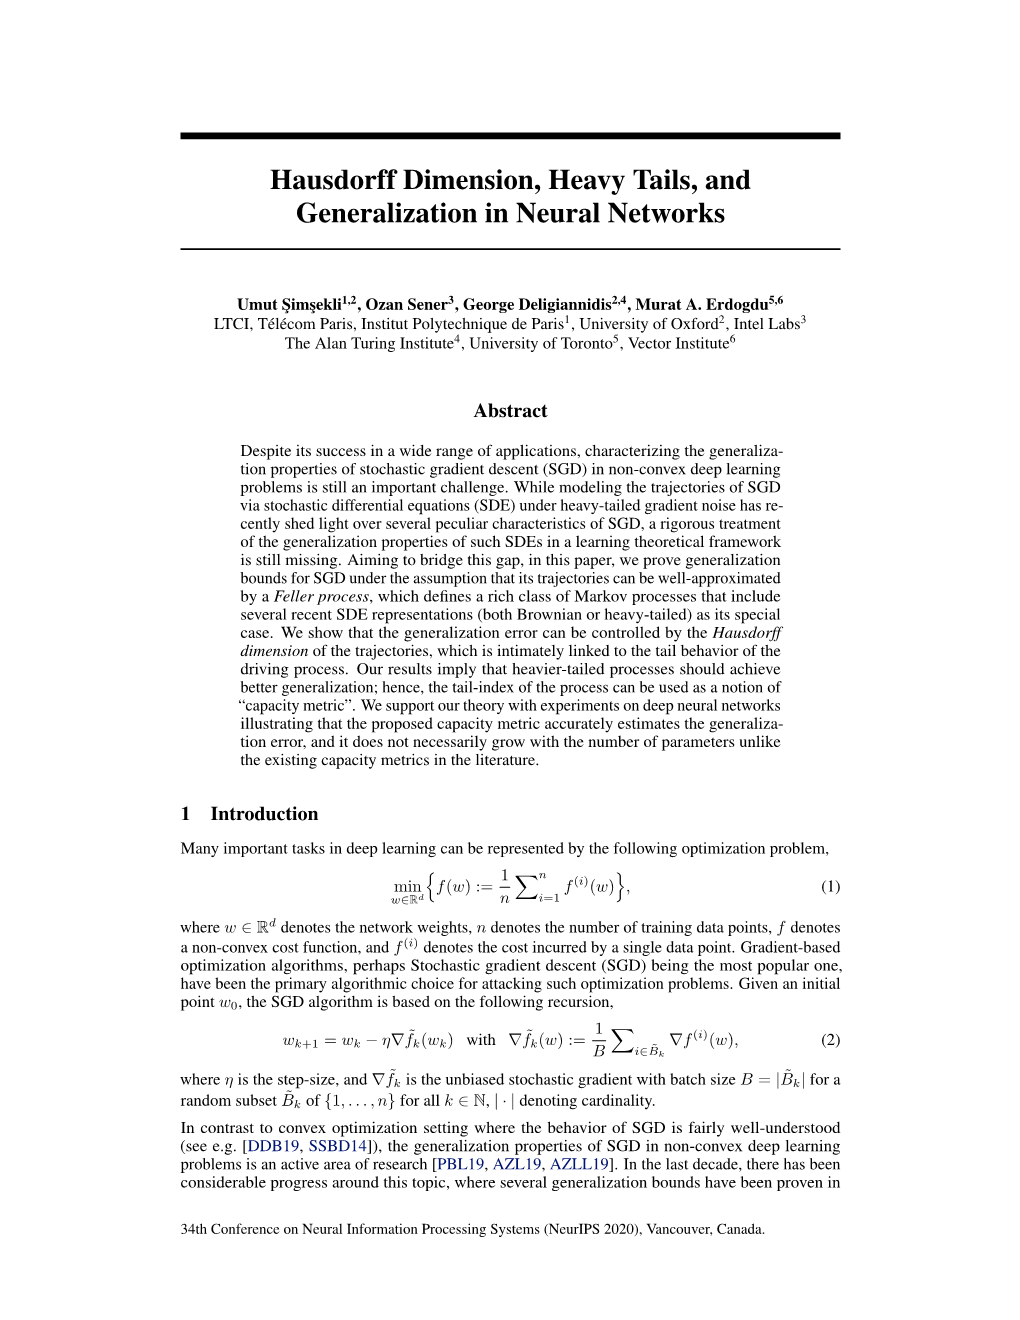 Hausdorff Dimension, Heavy Tails, and Generalization in Neural Networks